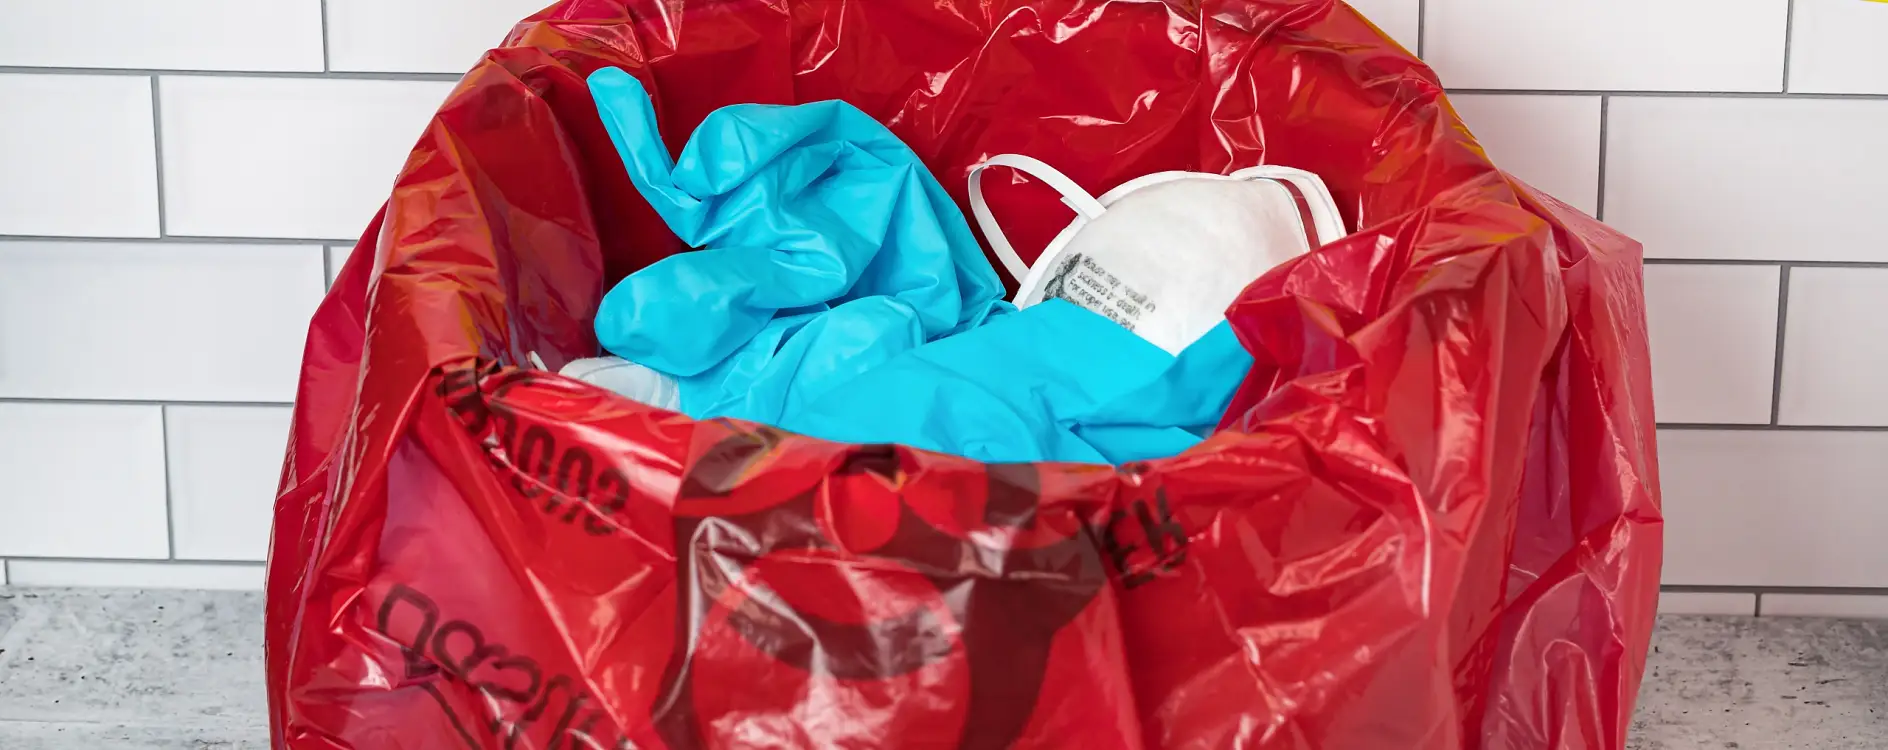 Safely Seal Bags of Contaminated Waste